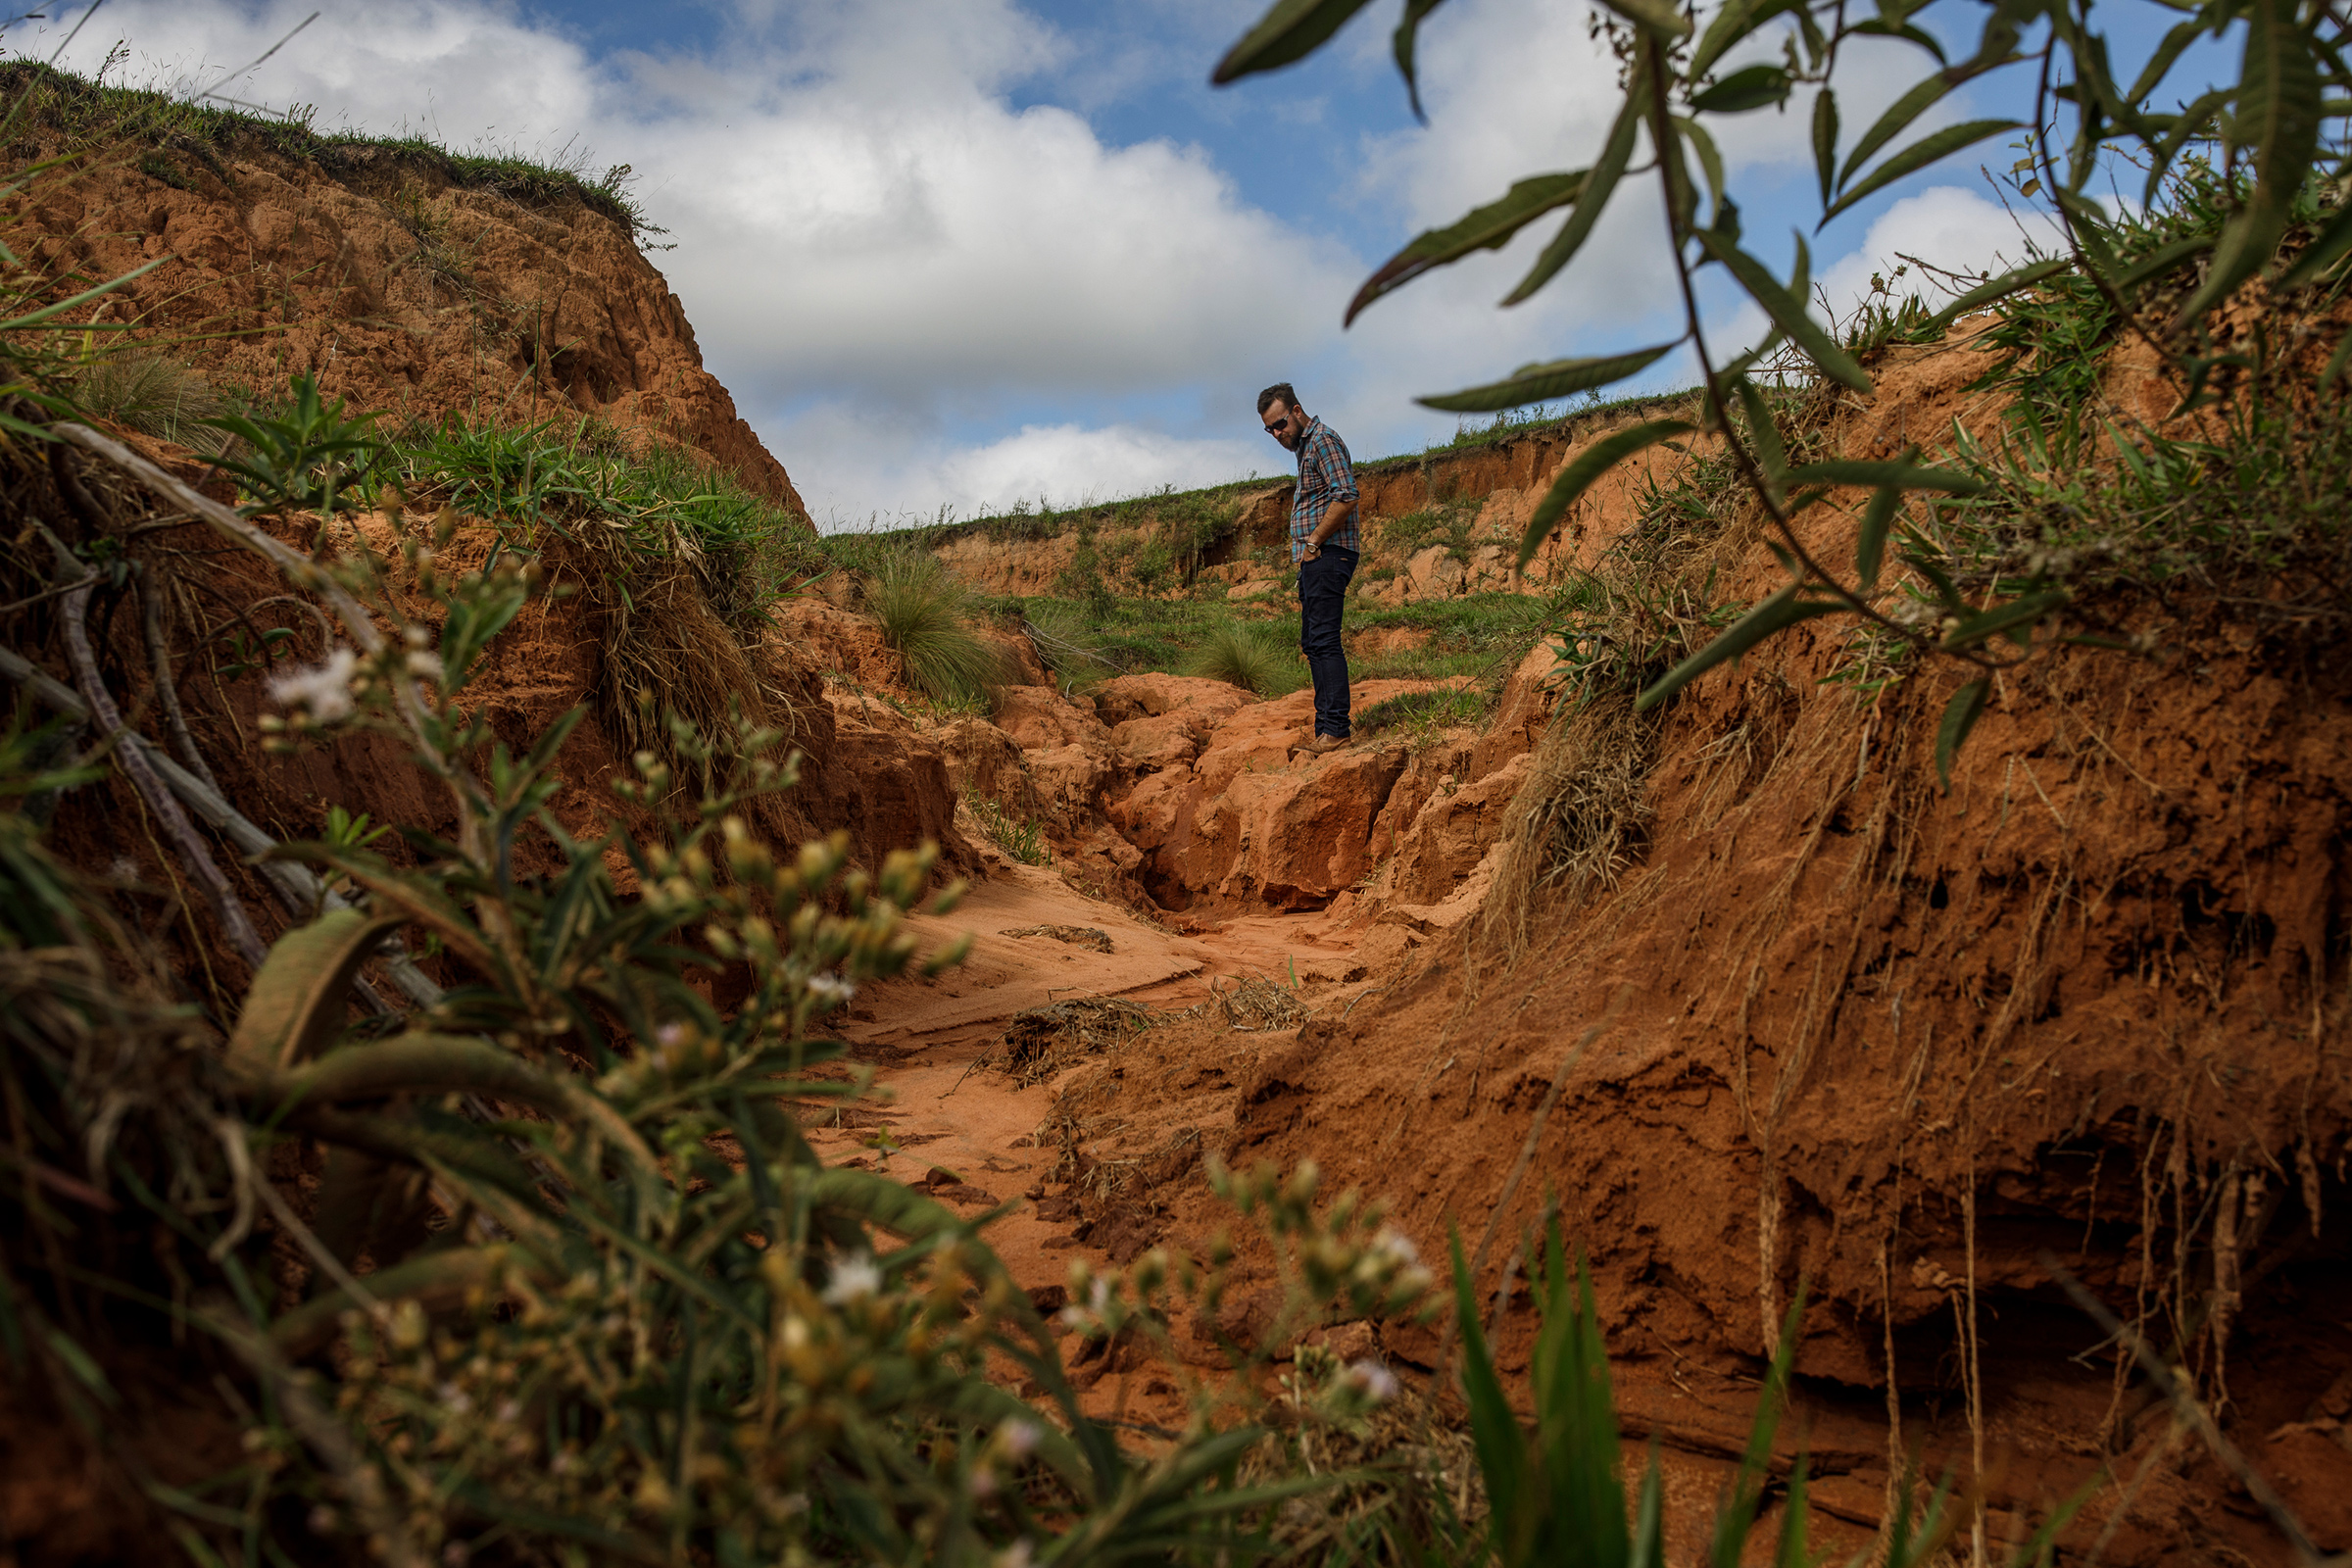 Victor Ziantoni agronomist, brother of Valter Ziantoni, observes a degraded and eroded area in Timburi. (Victor Moriyama for TIME)